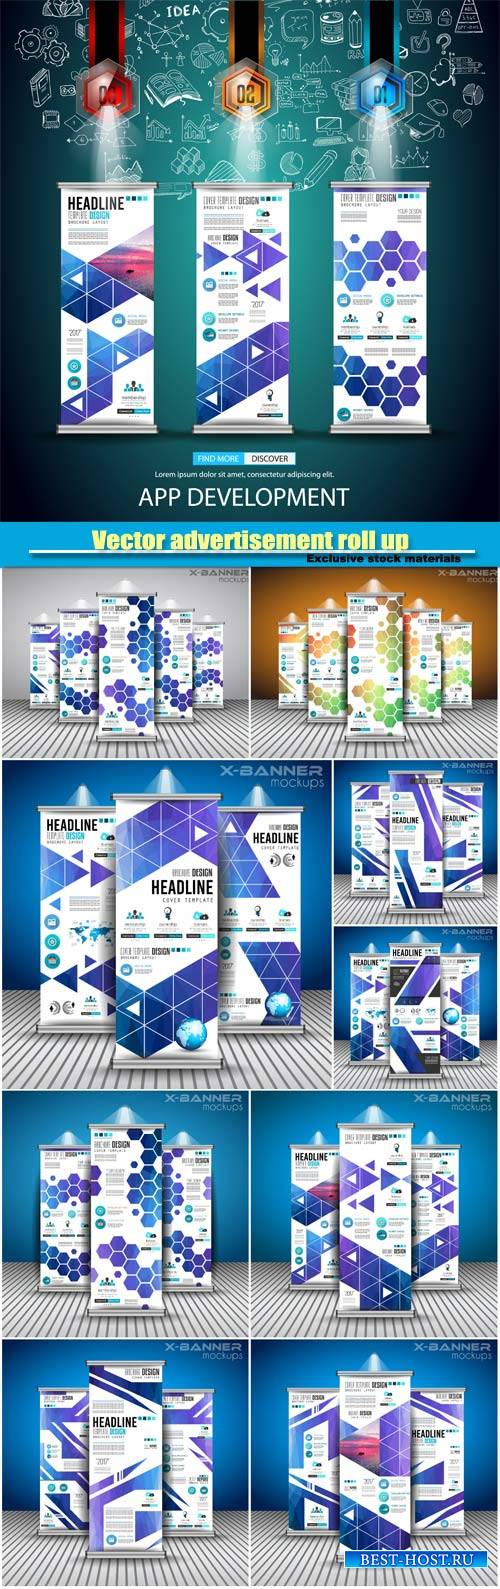 Vector advertisement roll up business flyers and brochure banners with vert ...